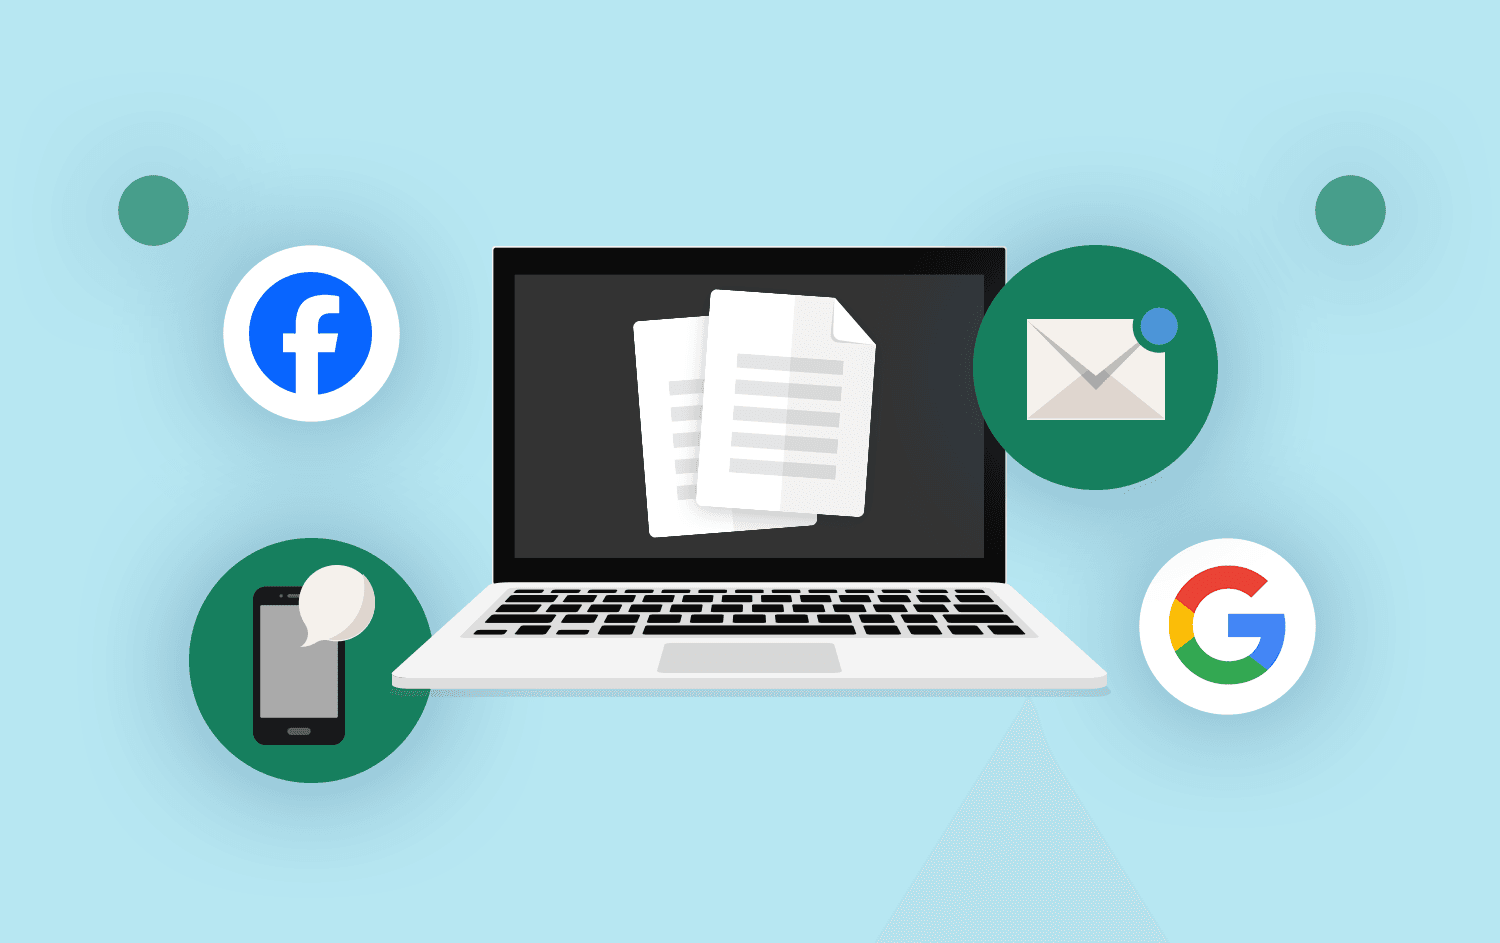 Icons representing different areas of digital marketing: Email, SMS, Google, Facebook, an icon representing a document on a computer